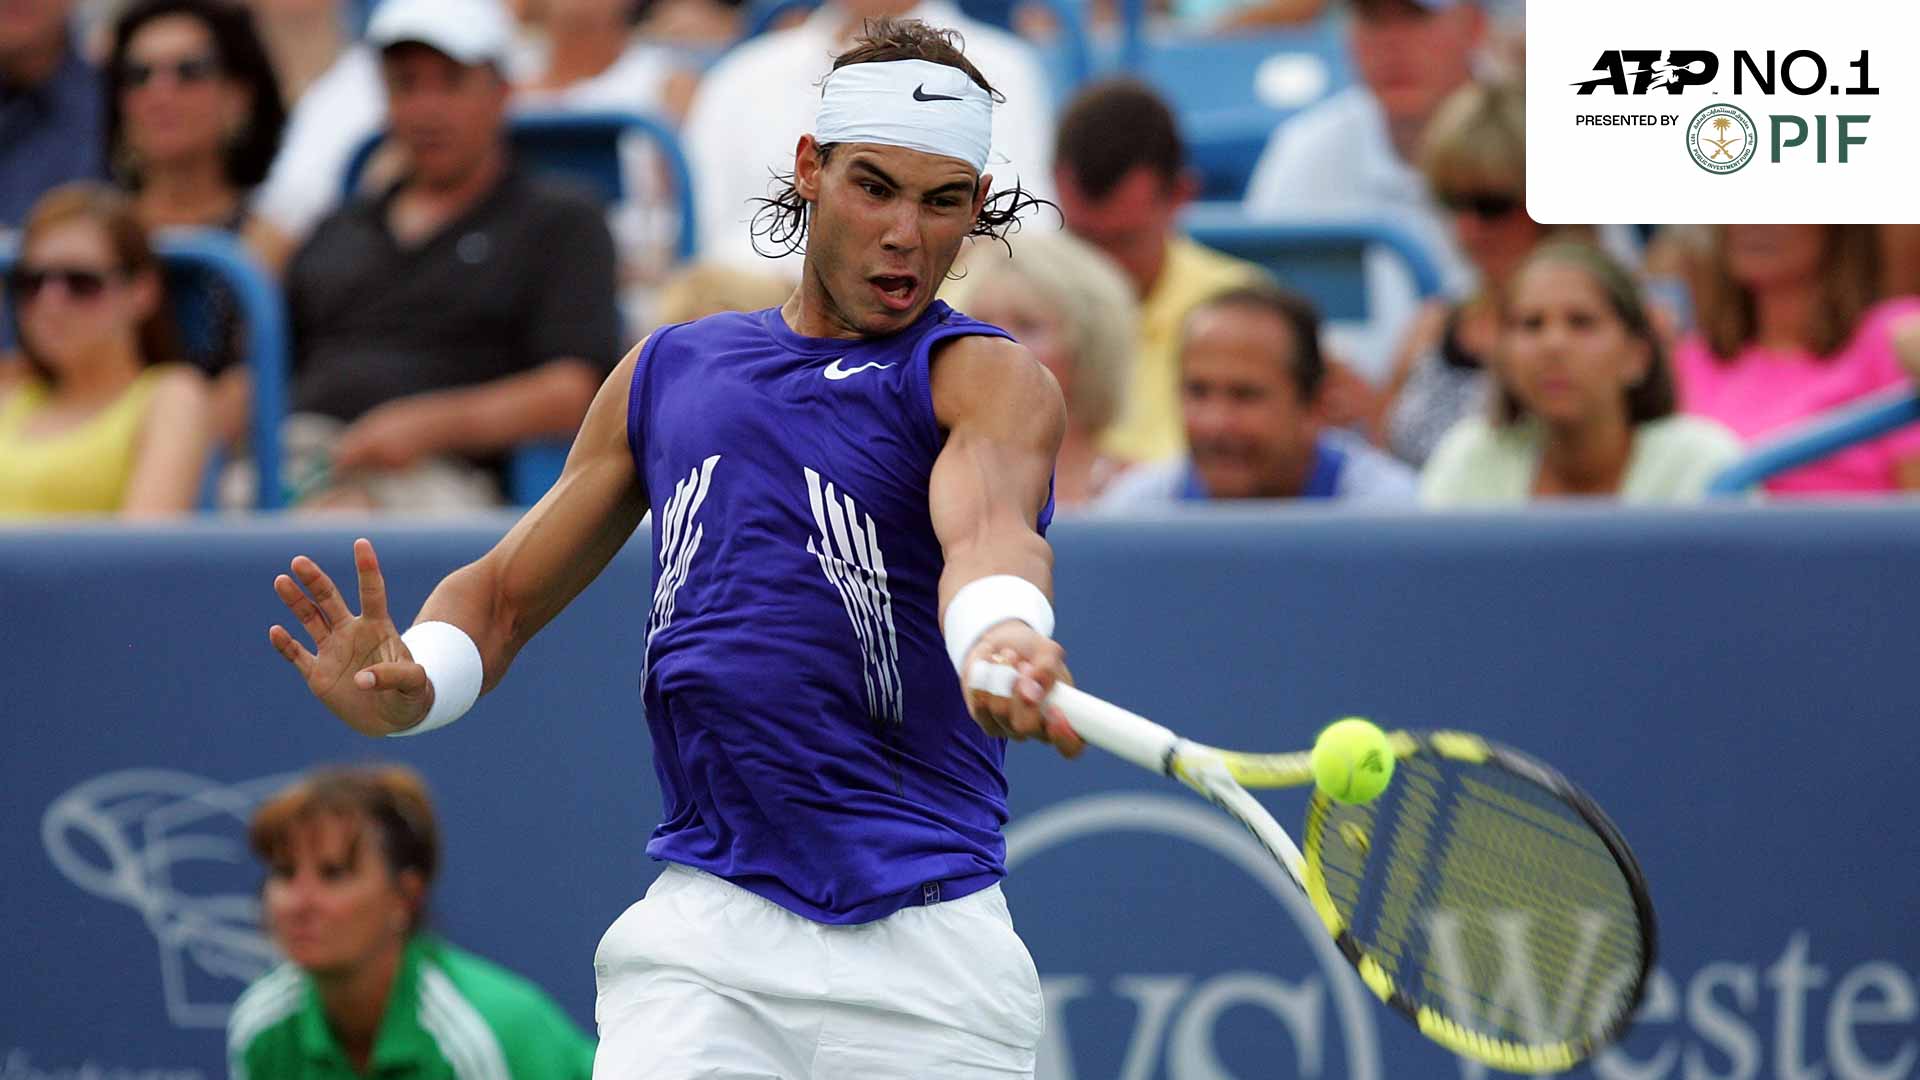 Rafael Nadal beat Nicolas Lapentti in the 2008 Western & Southern Open quarter-finals to guarantee his rise to No. 1 in the PIF ATP Rankings.